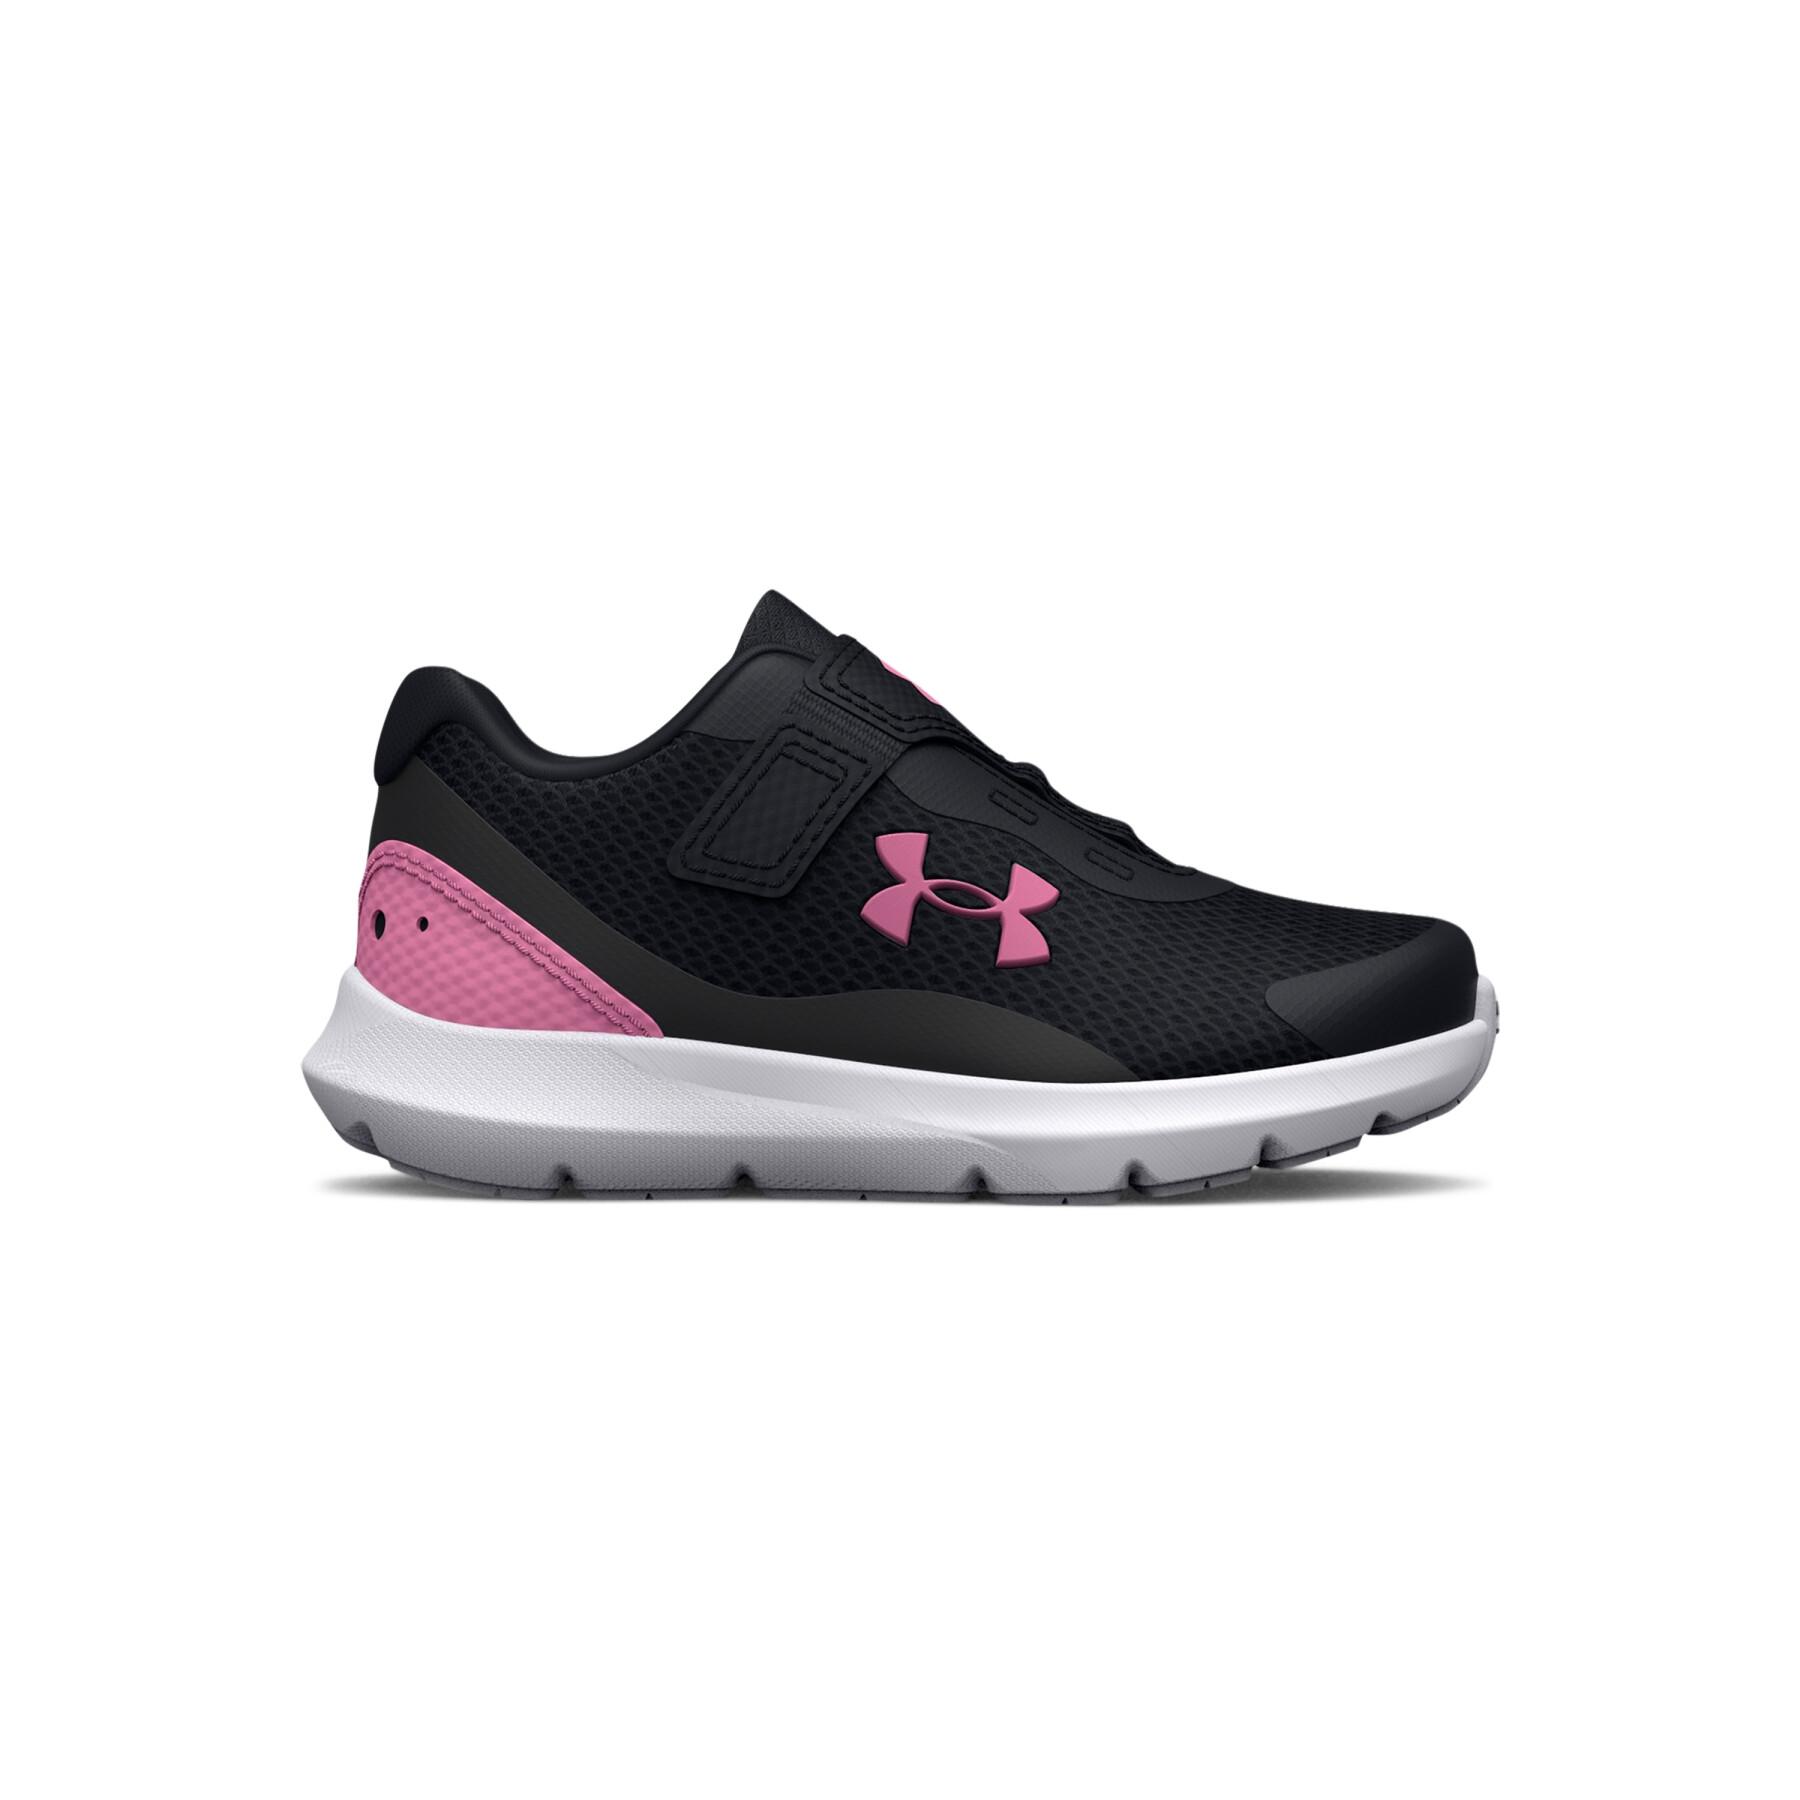 Chaussures de running fille Under Armour Ginf surge 3 AC